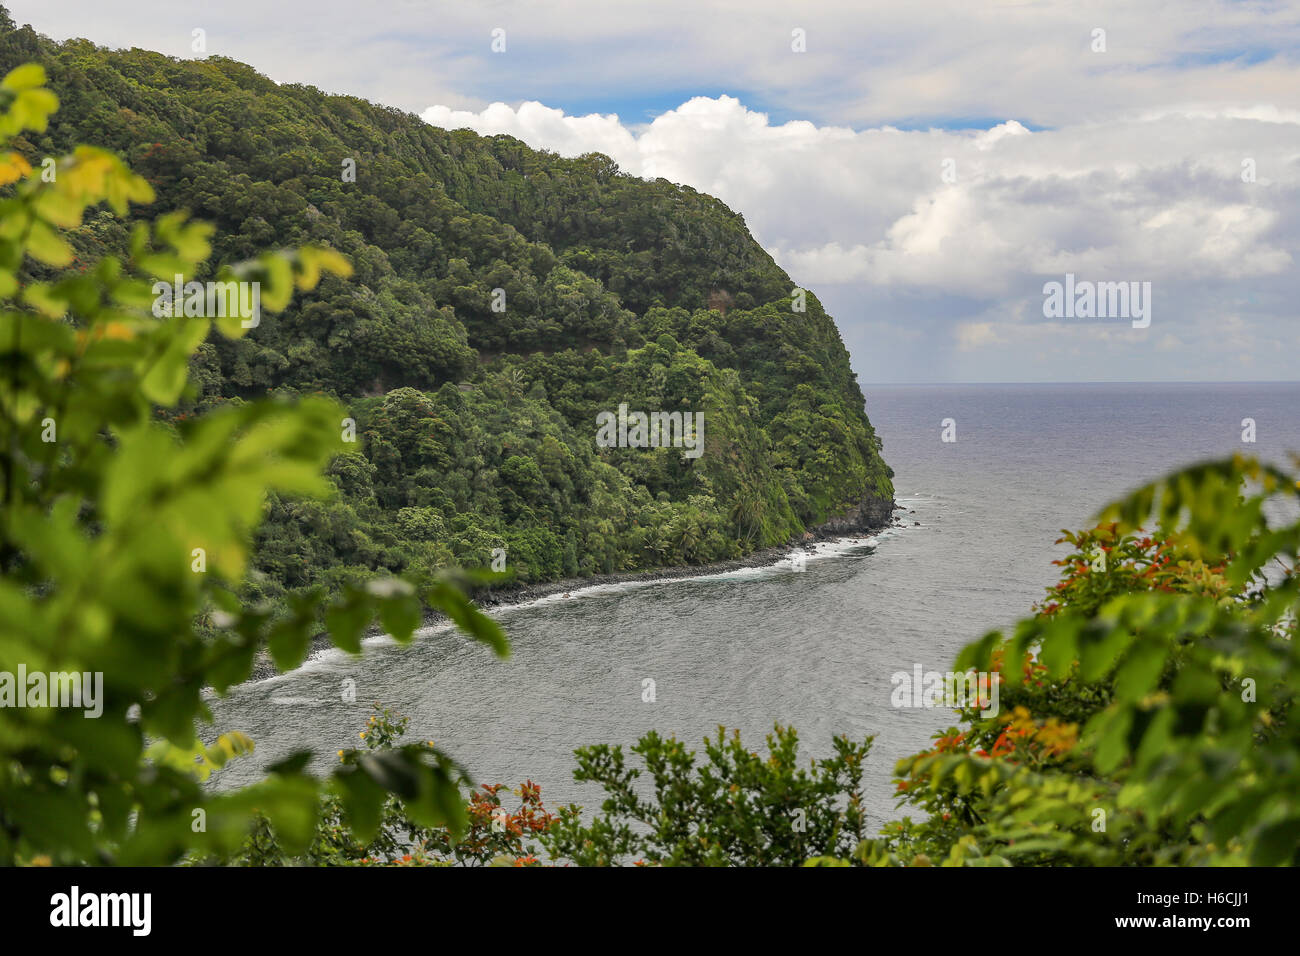 Image of the Hana Highway on Maui taken from a section with only one lane and where the sea meets the jungle. Stock Photo